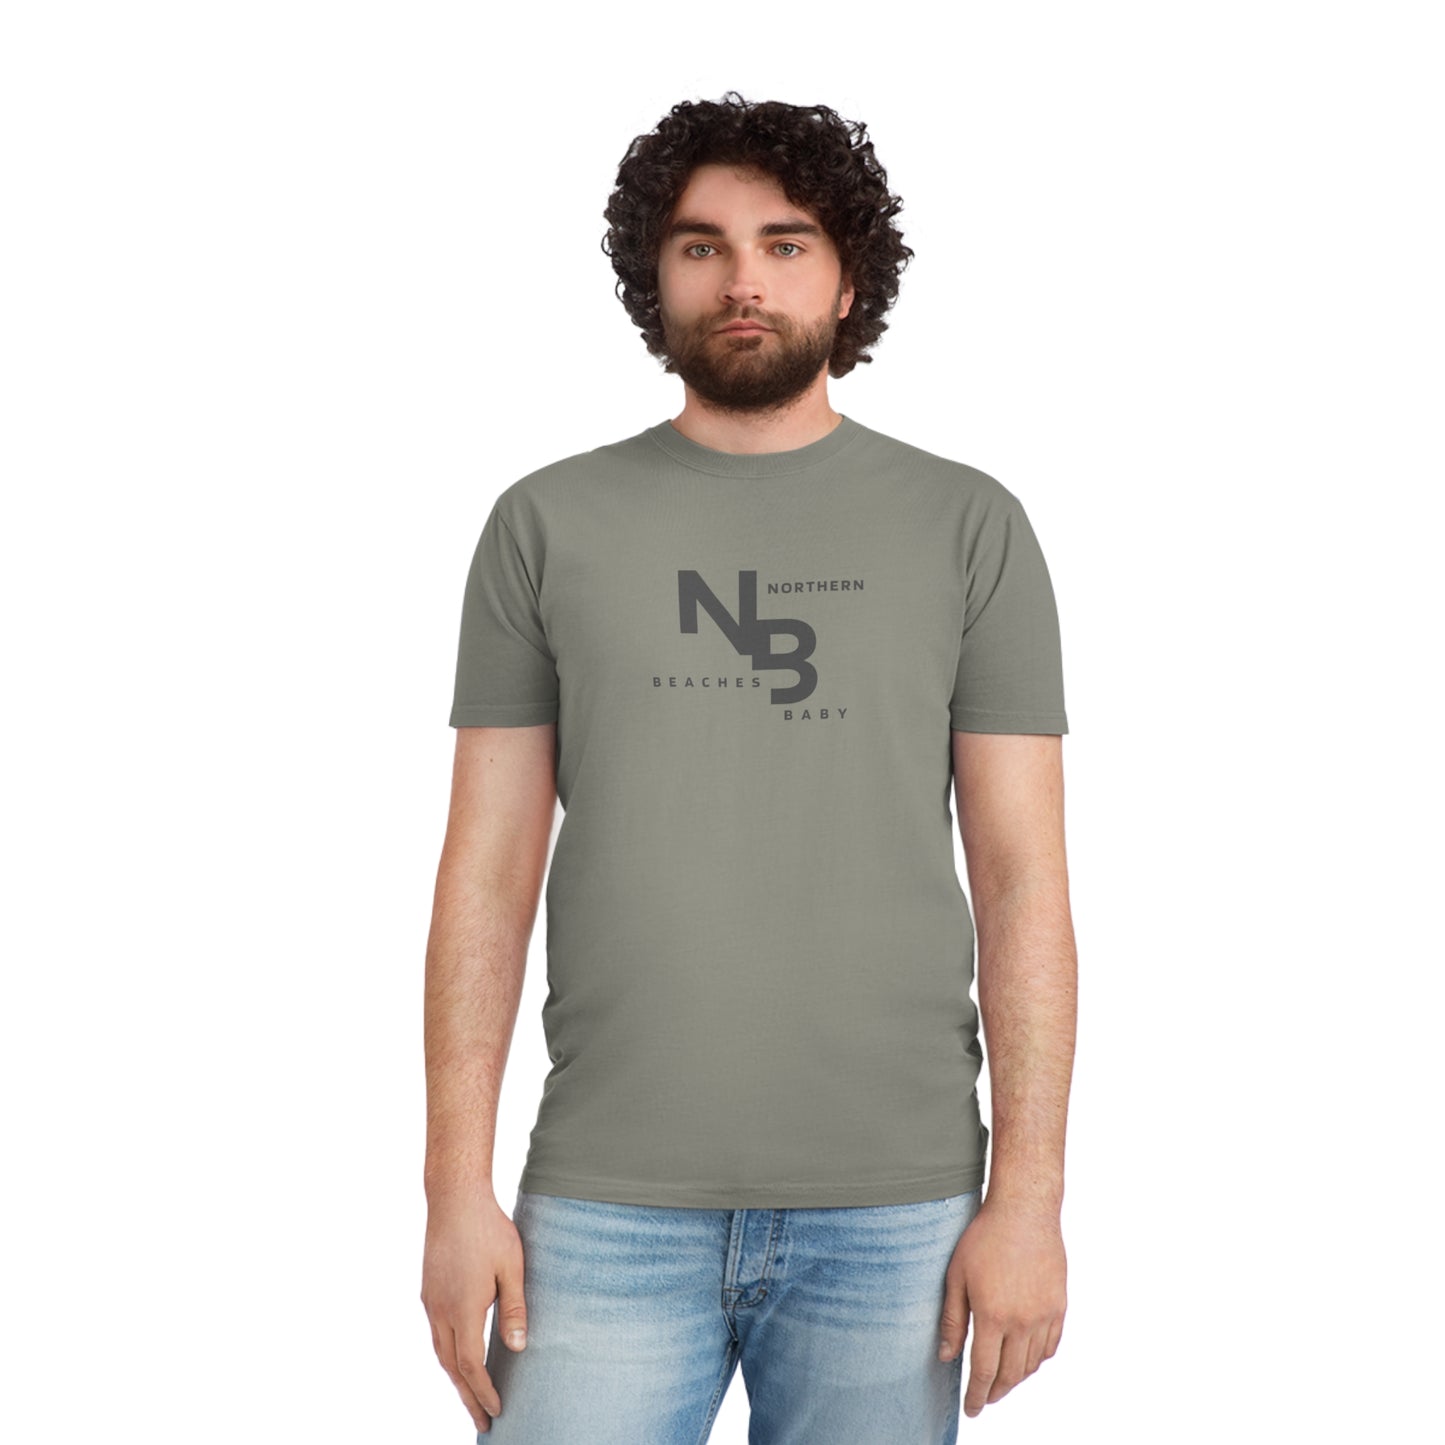 Faded Cotton T-Shirt Northern Beaches Baby